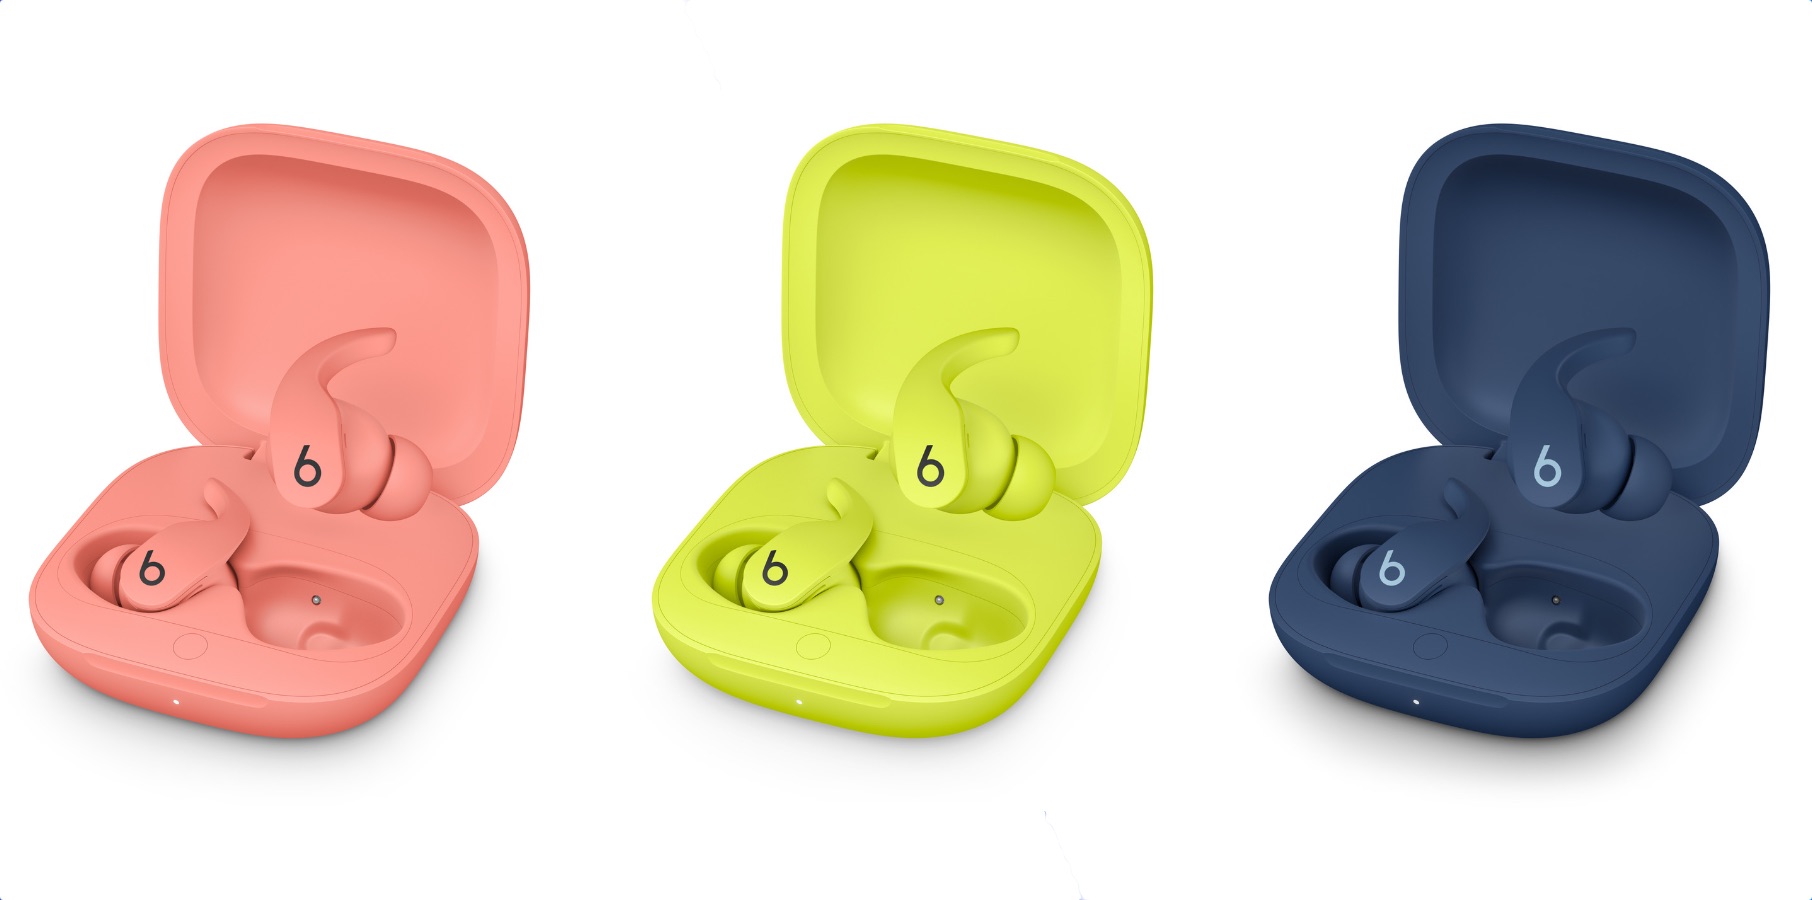 Beats Fit Pro now available in Tidal Blue, Volt Yellow, and Coral Pink